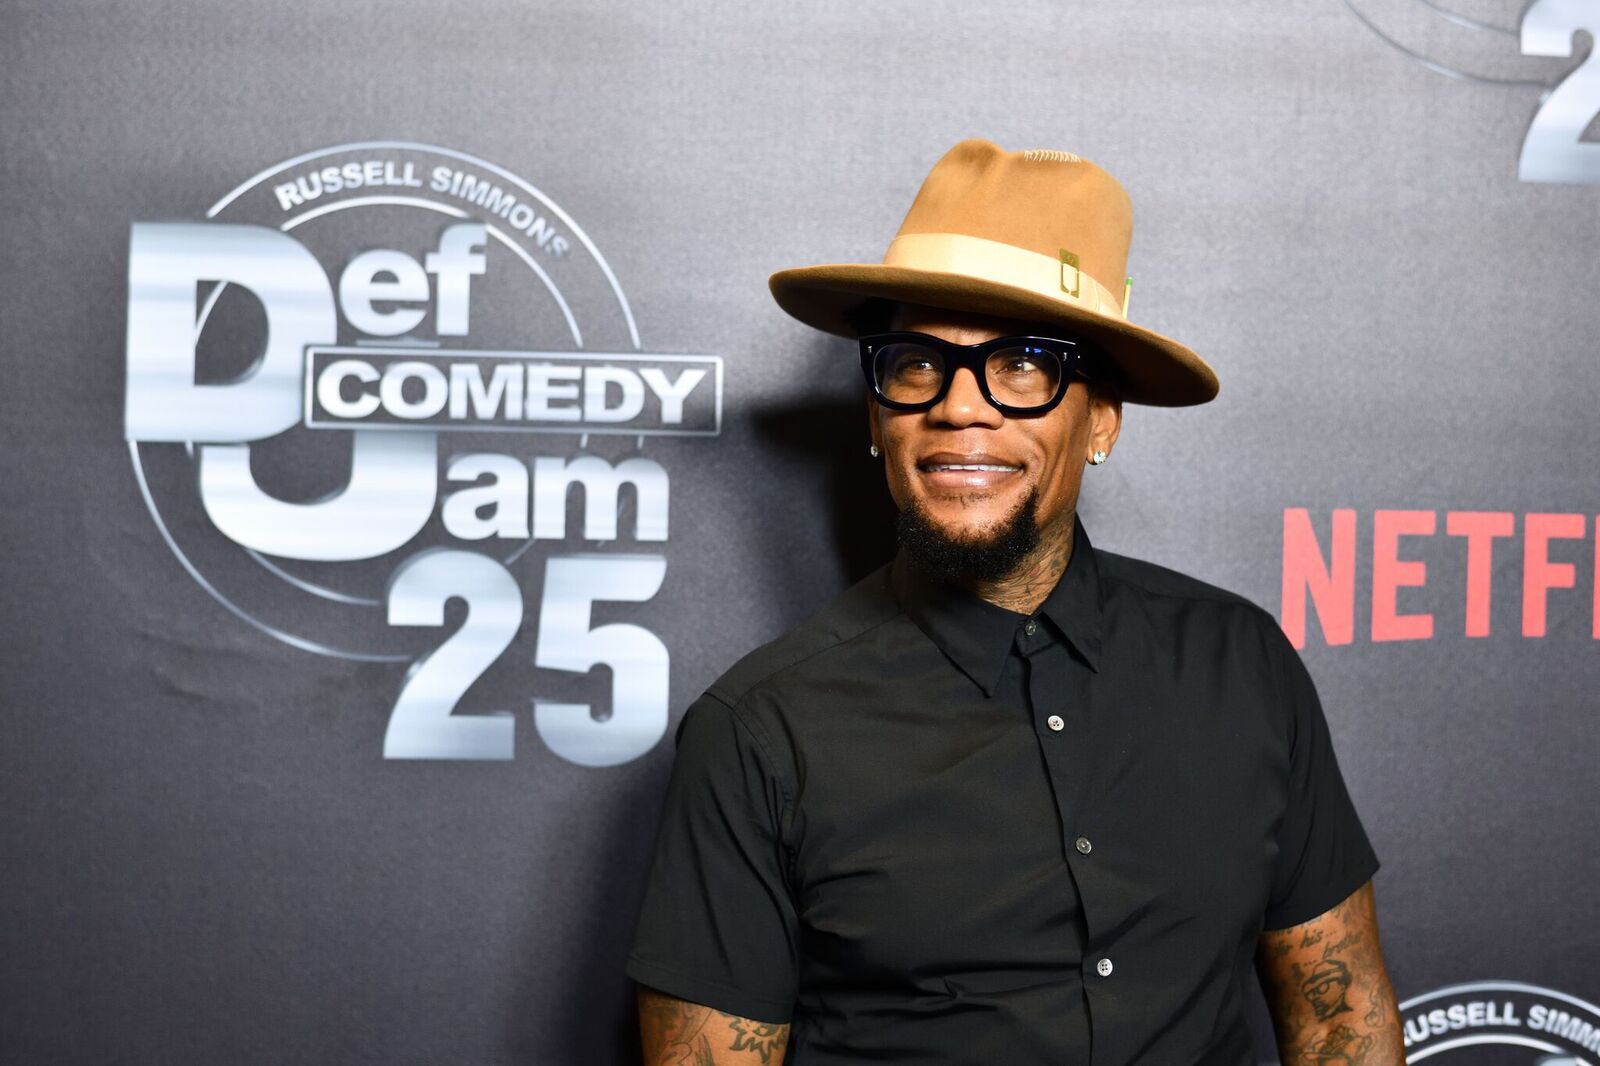  D.L. Hughley at "Def Comedy Jam 25" in Beverly Hills in 2017 | Photo: Getty Images